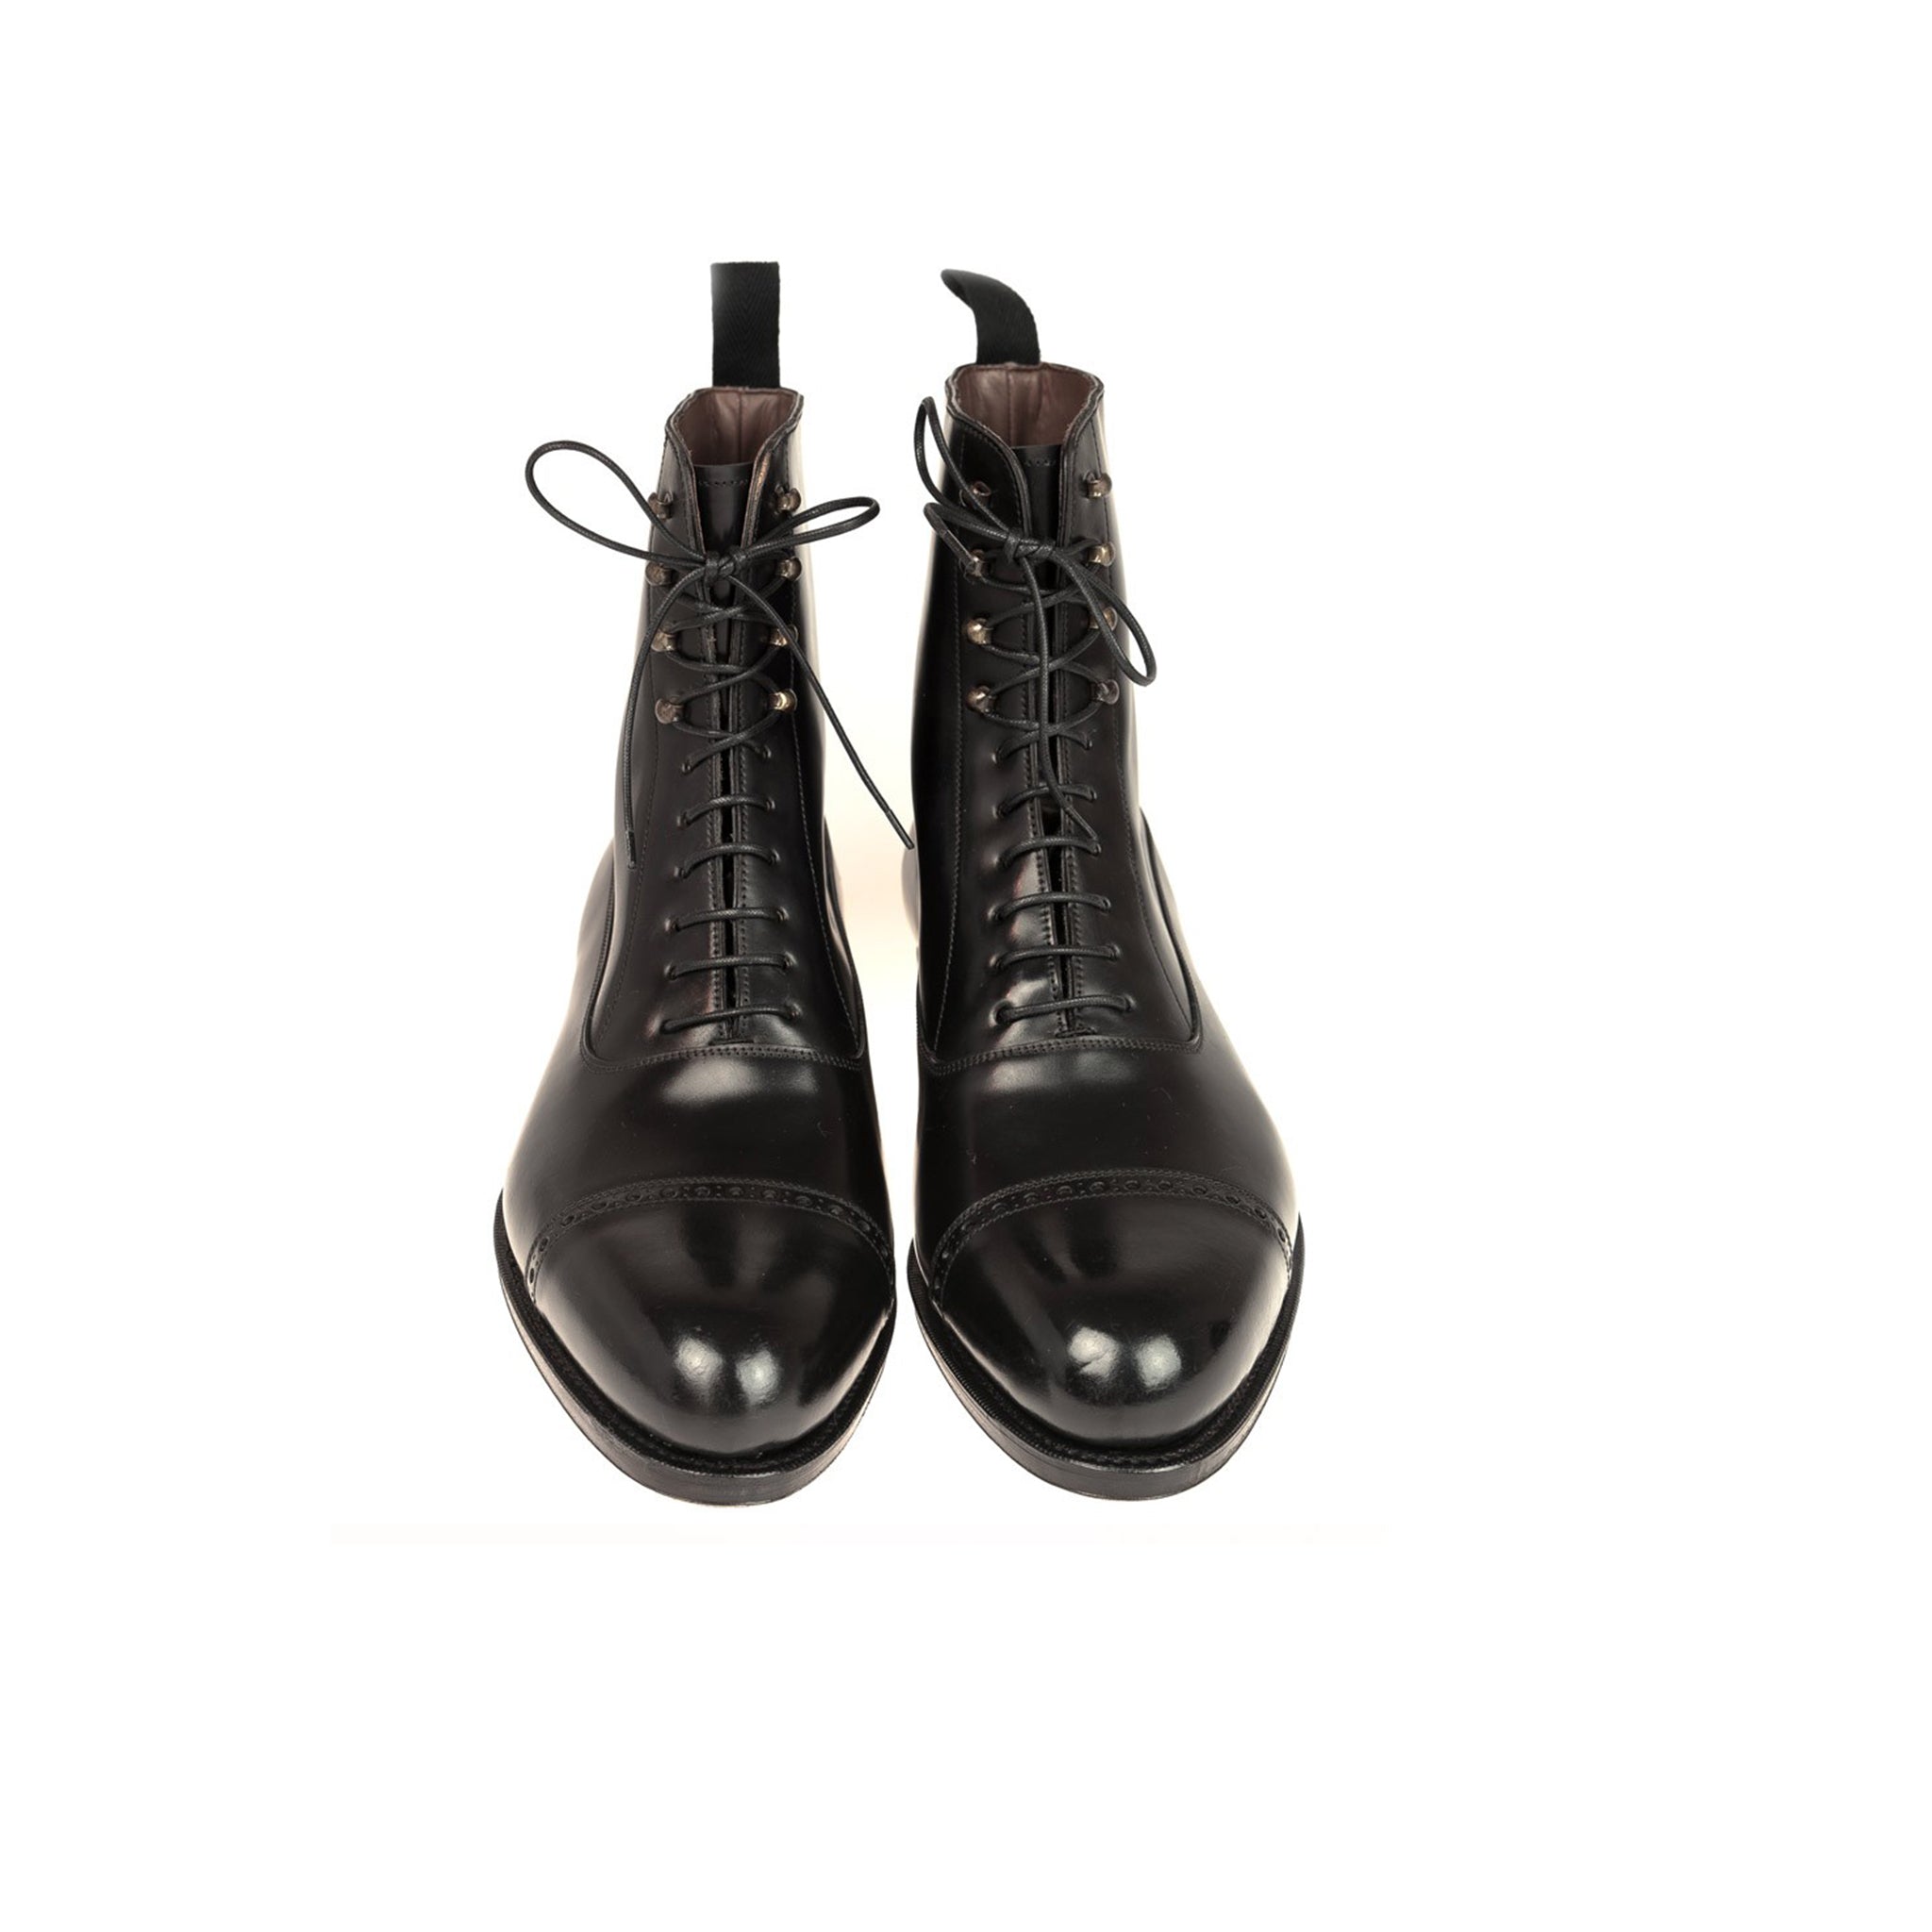 Midnight Lace-up High Ankle Boots